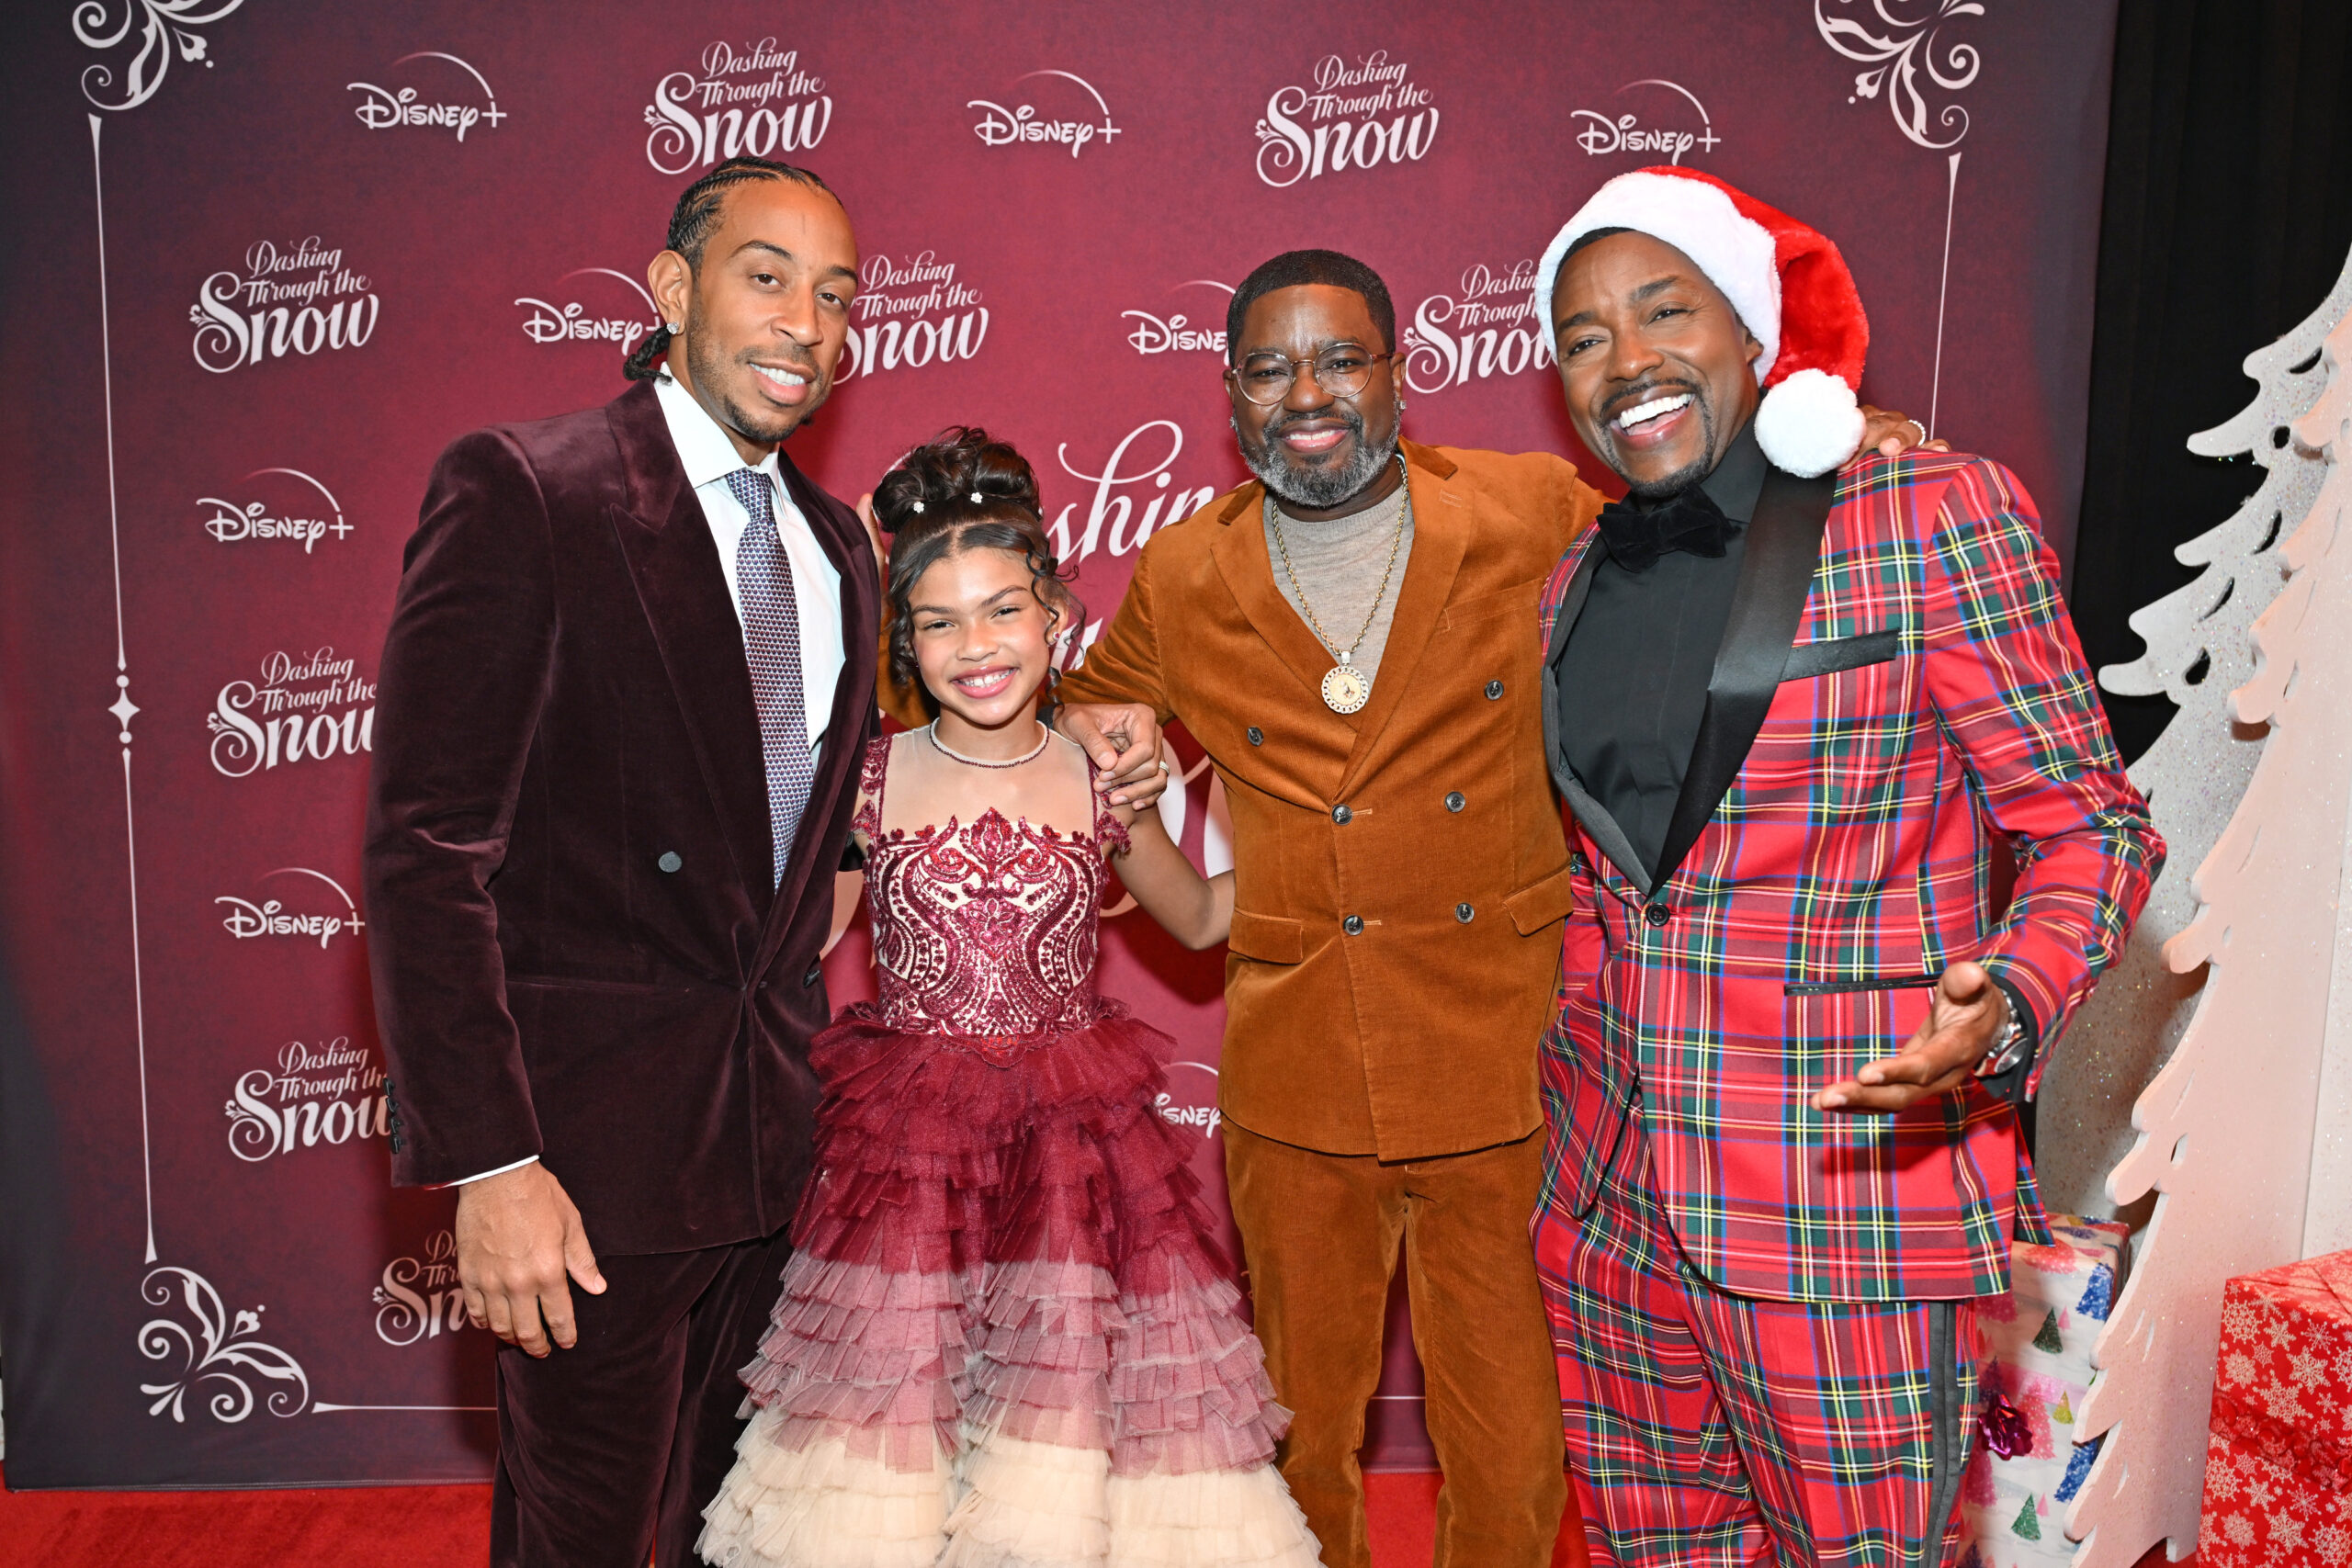 Get Into the Holiday Spirit: Disney+ Presents 'Dashing Through the Snow' with Exclusive Screening in Atlanta